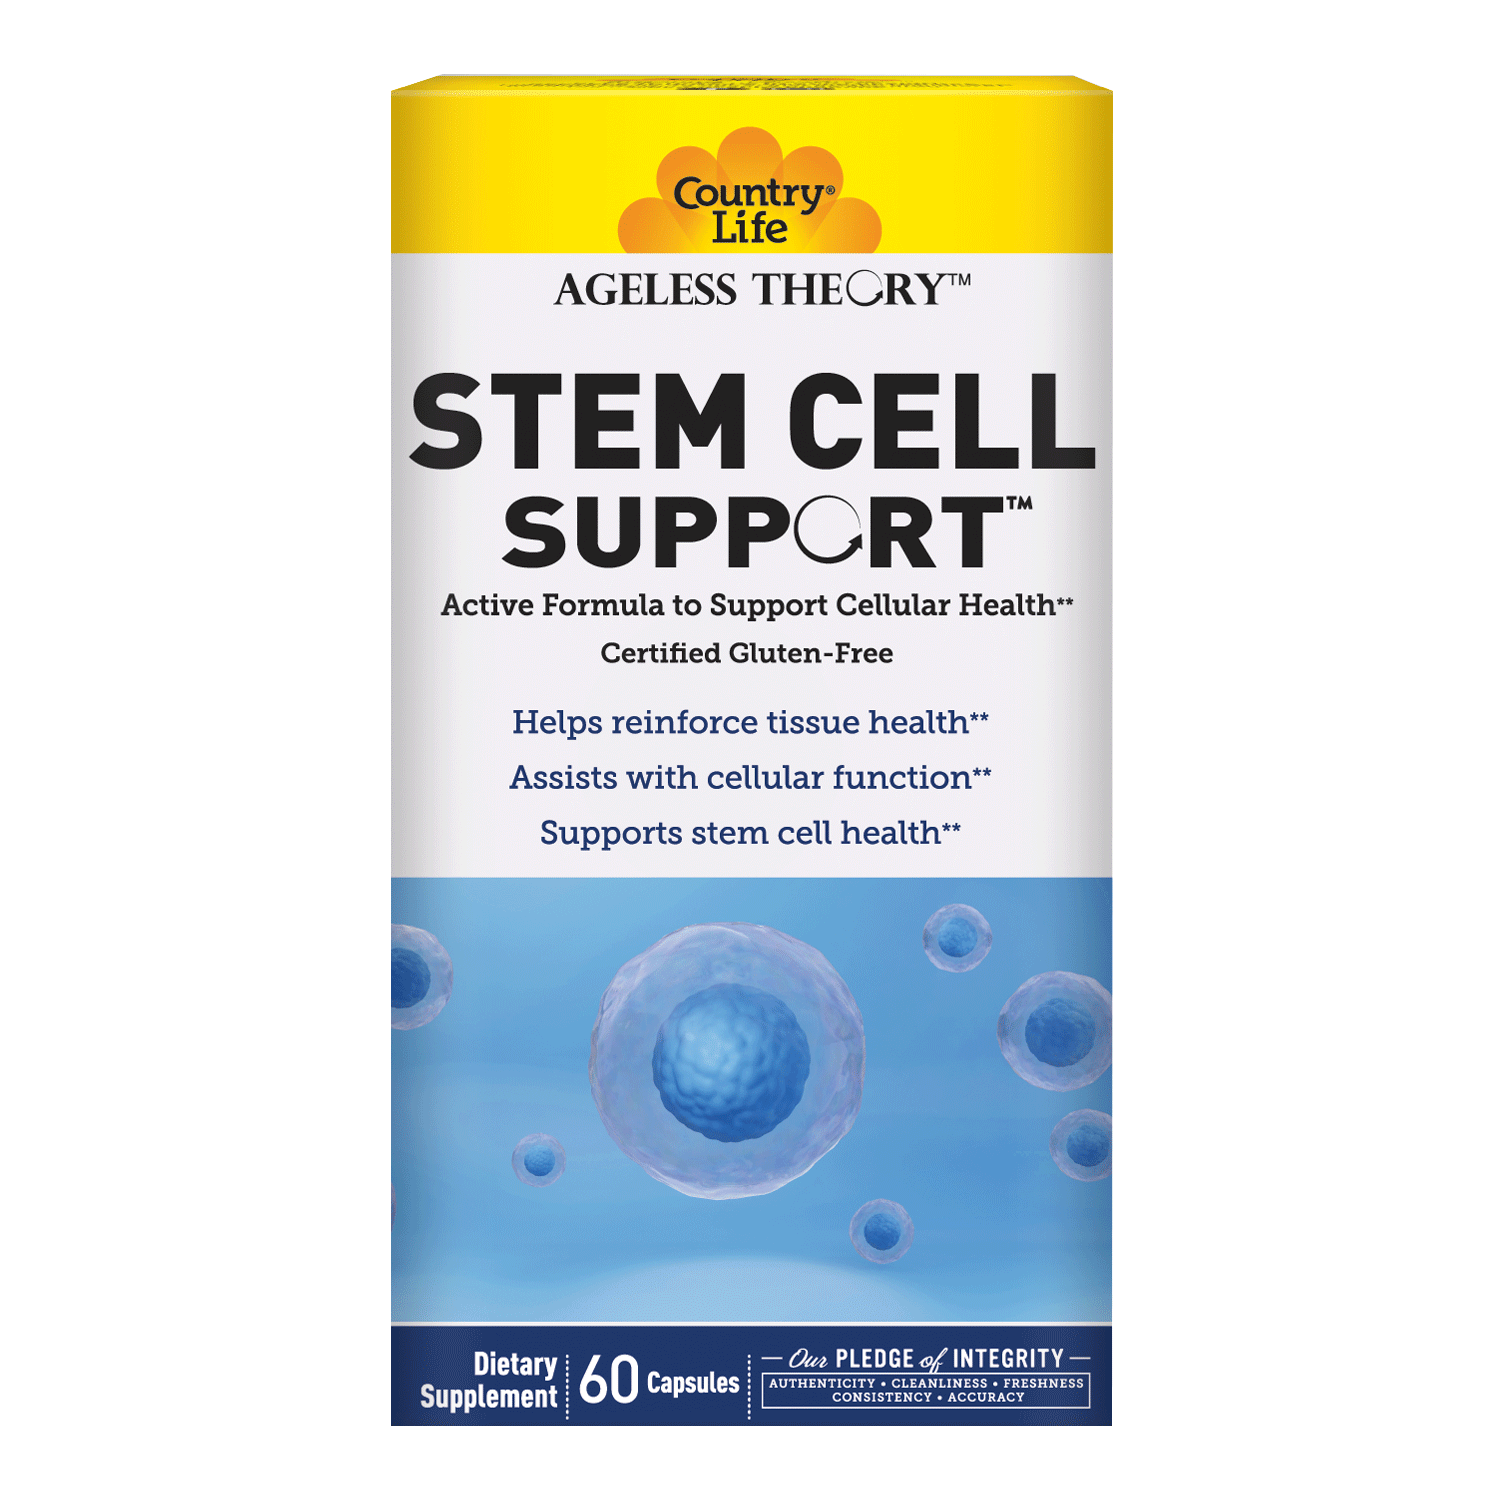 The packaging for the Ageless Theory Stem Cell support product